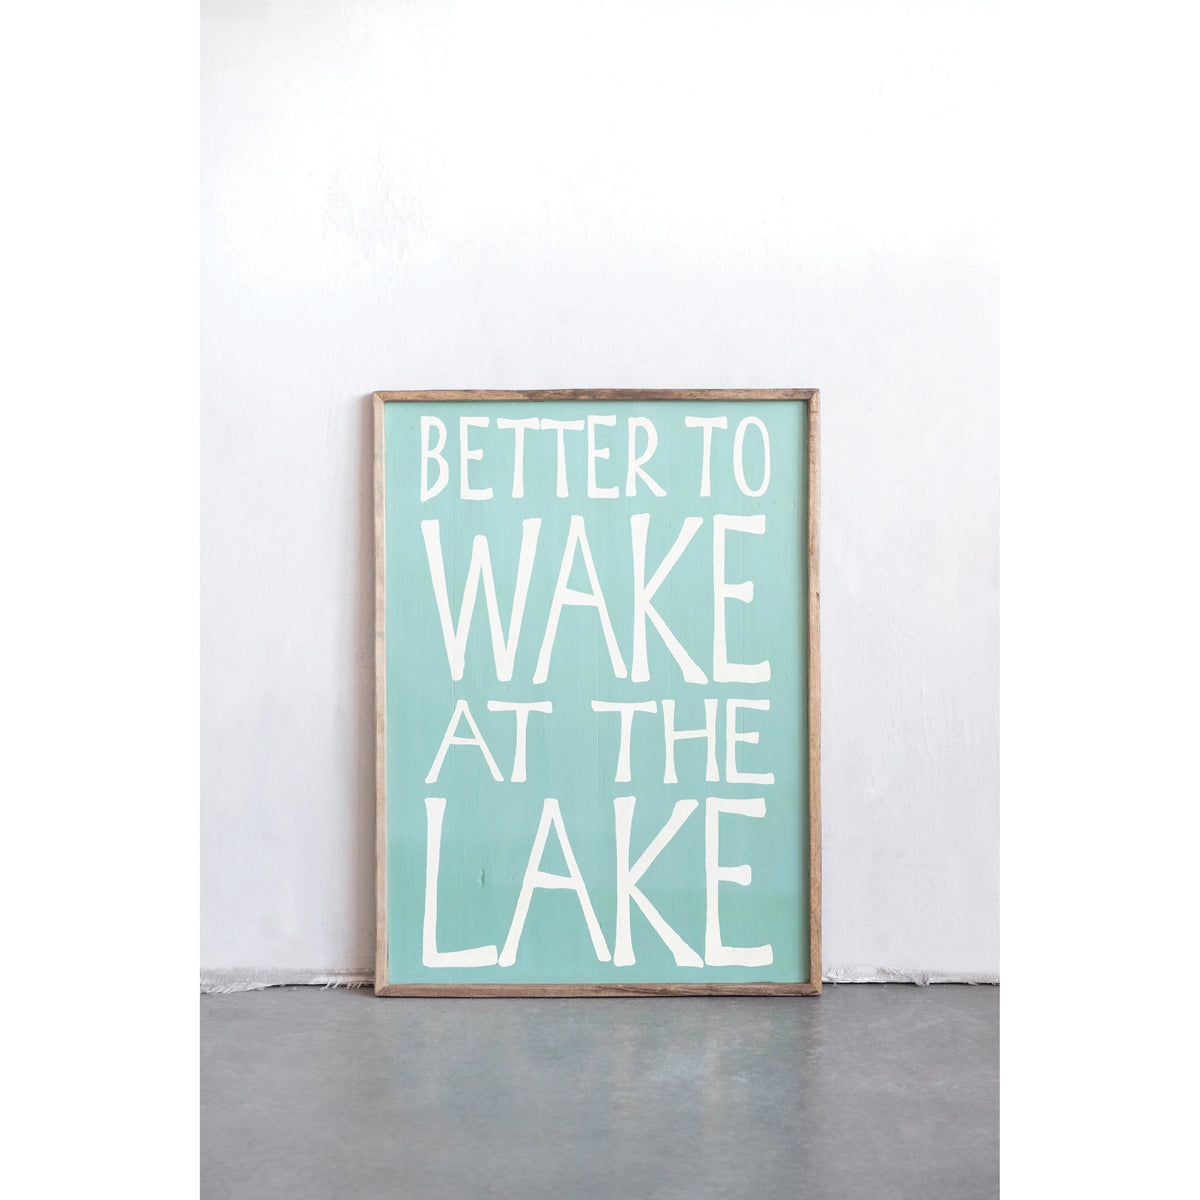 Recycled Wood Wall Décor "Better To Wake At the Lake"